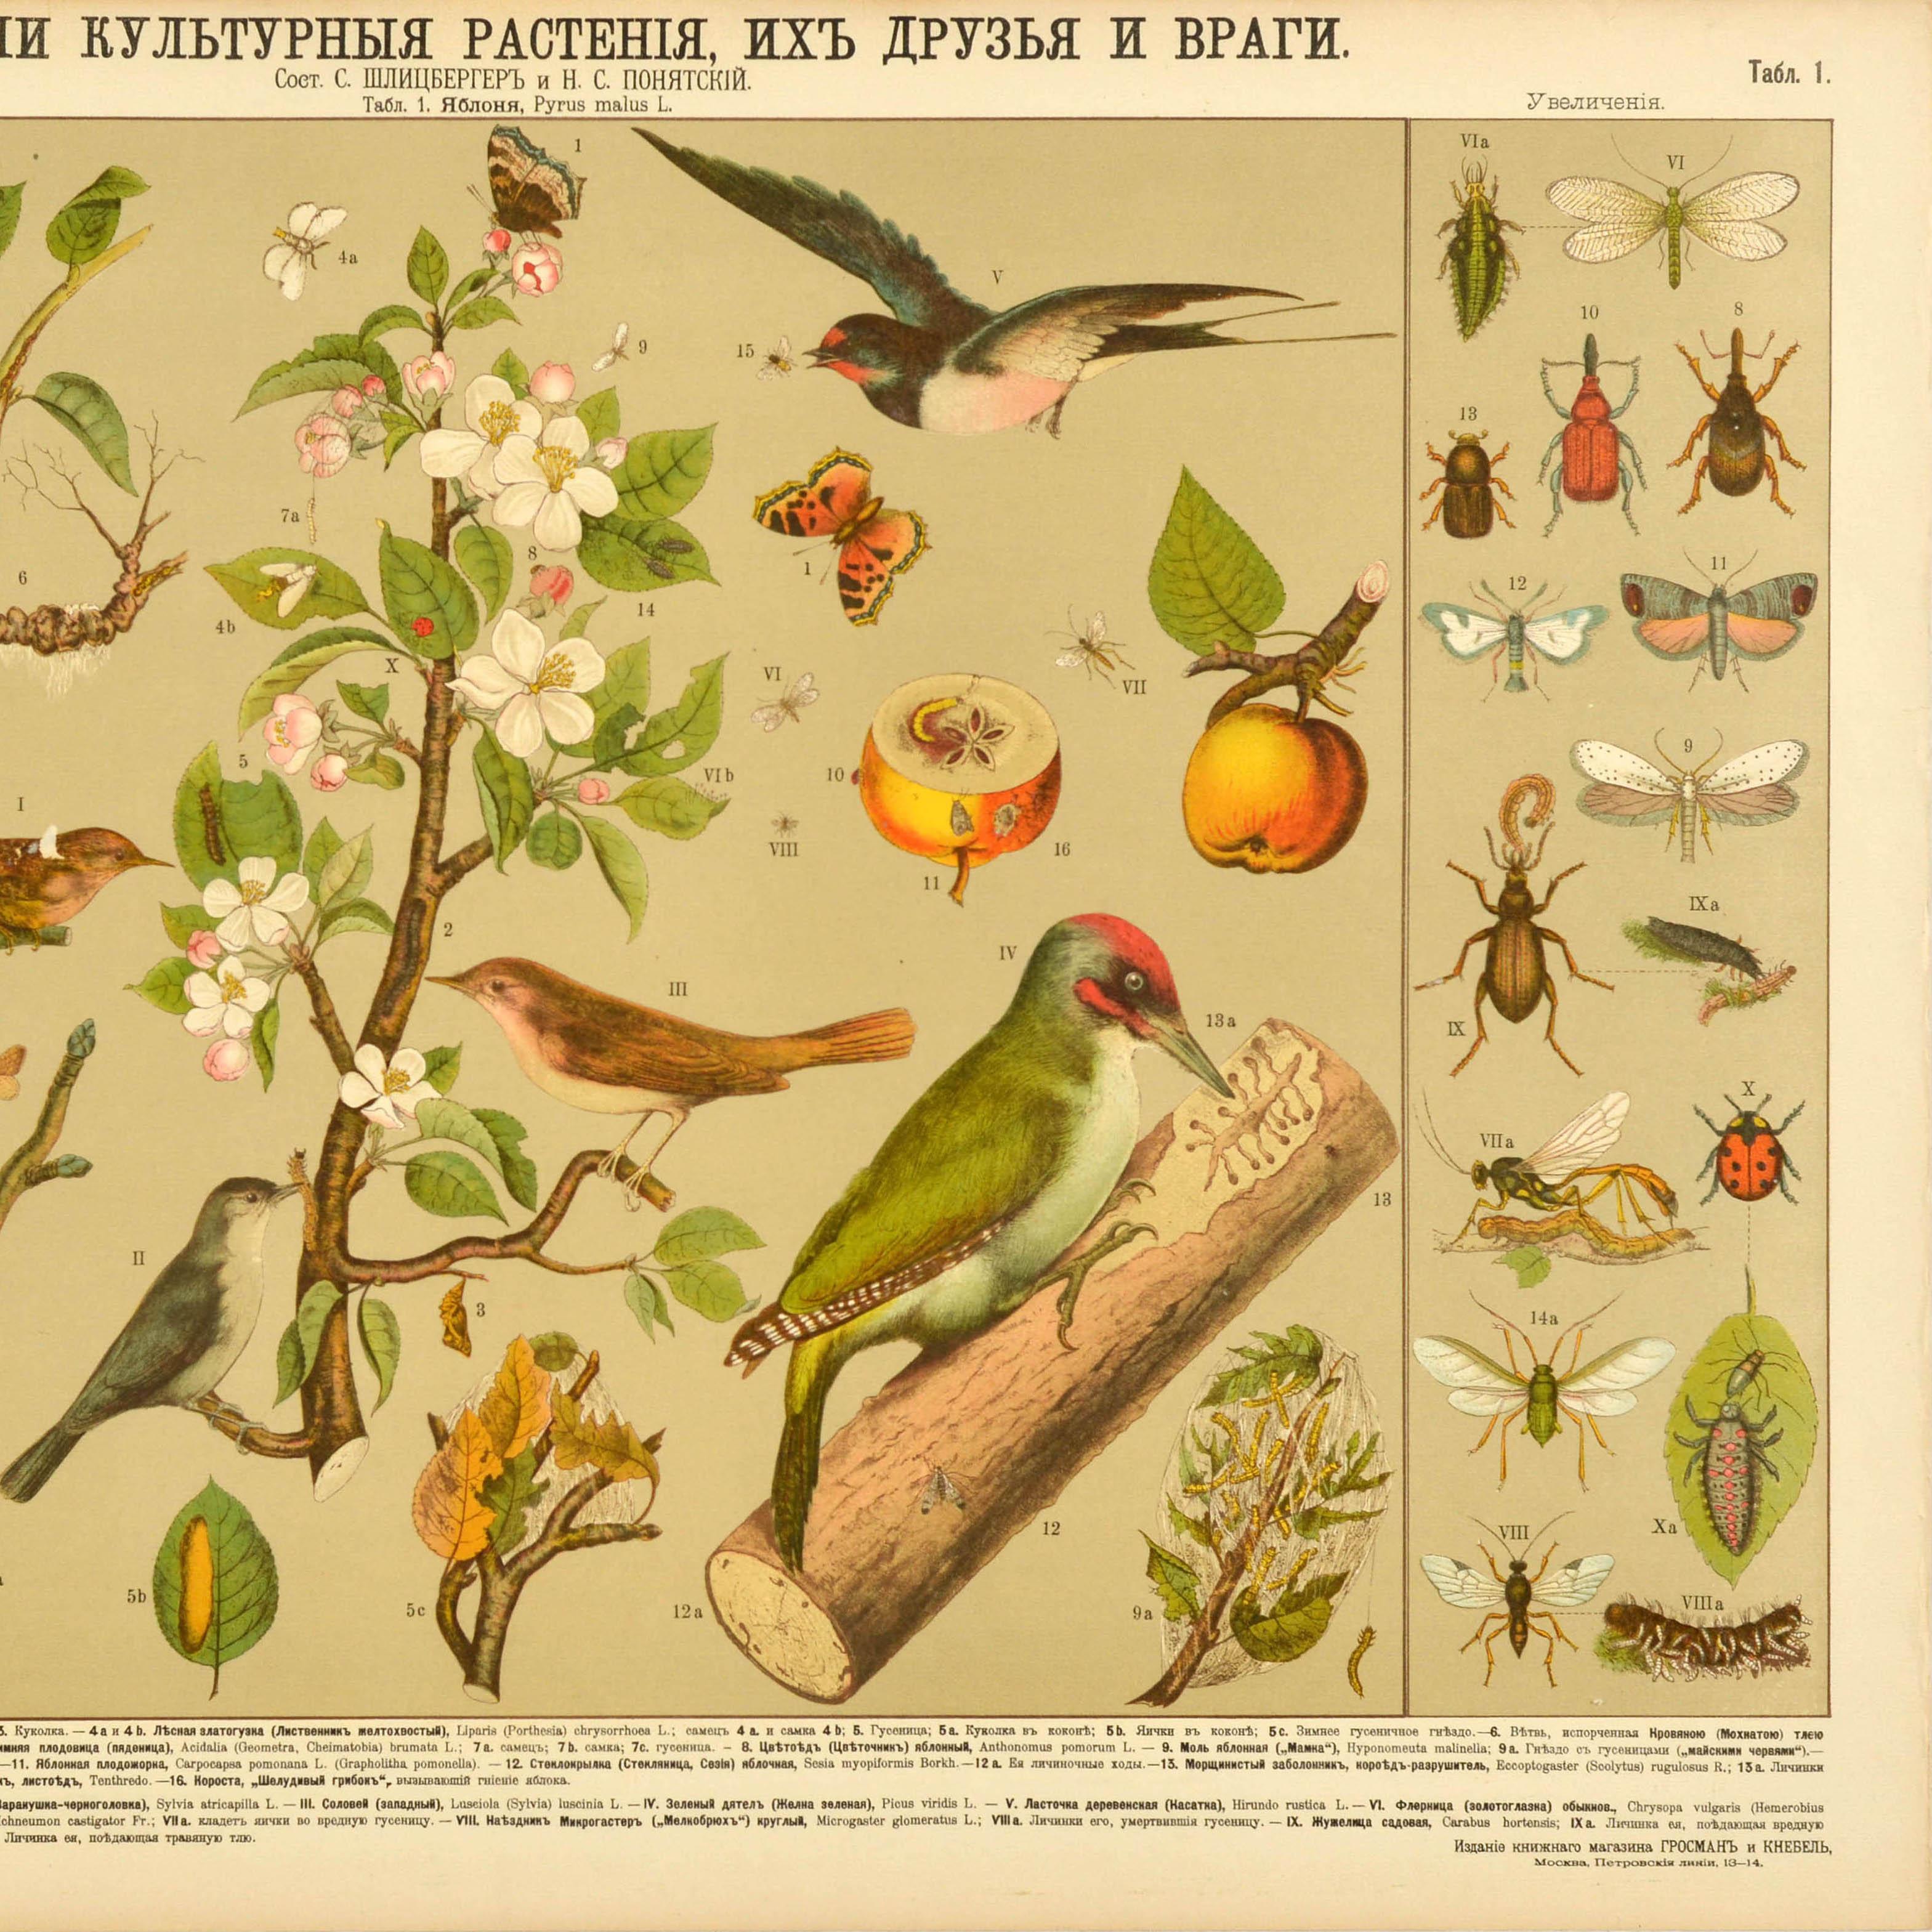 Original antique educational poster - Our cultivated plants, their friends and enemies - featuring numbered illustrations of an apple tree (Pyrus malus L.) with flowers and leaves, surrounded by the fruit and branches, different birds and insects